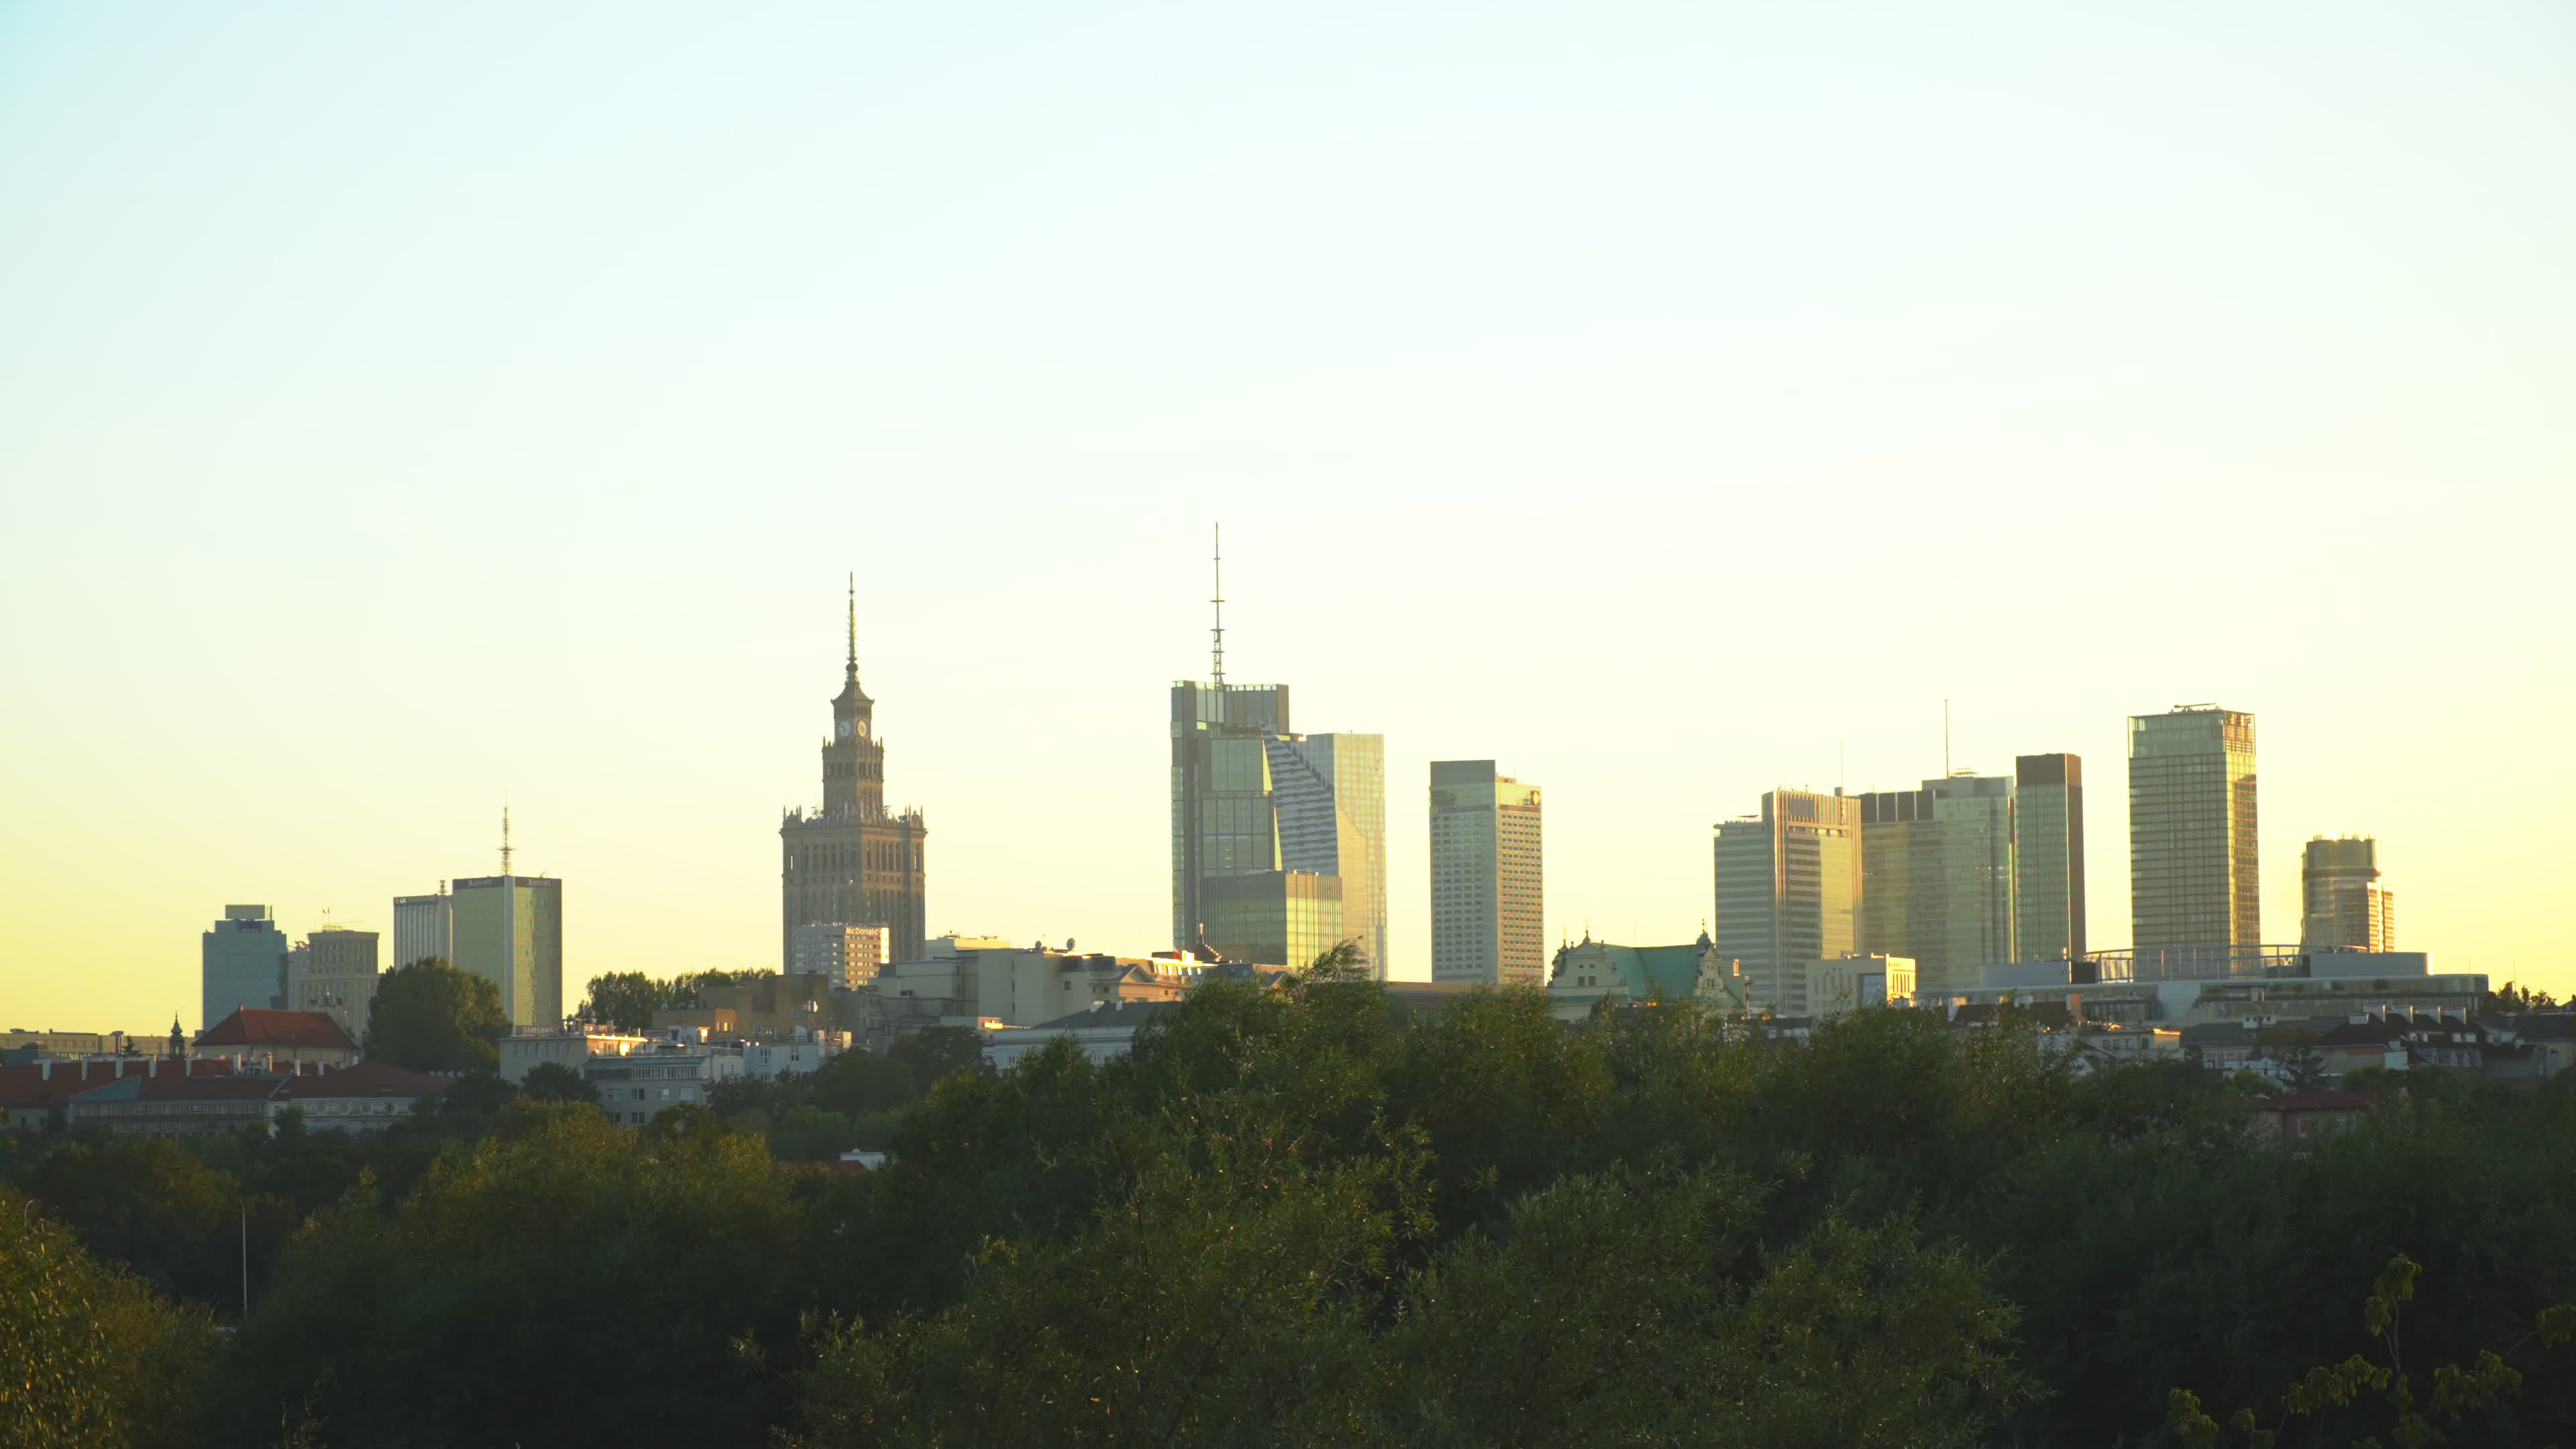 Daily life in Warsaw